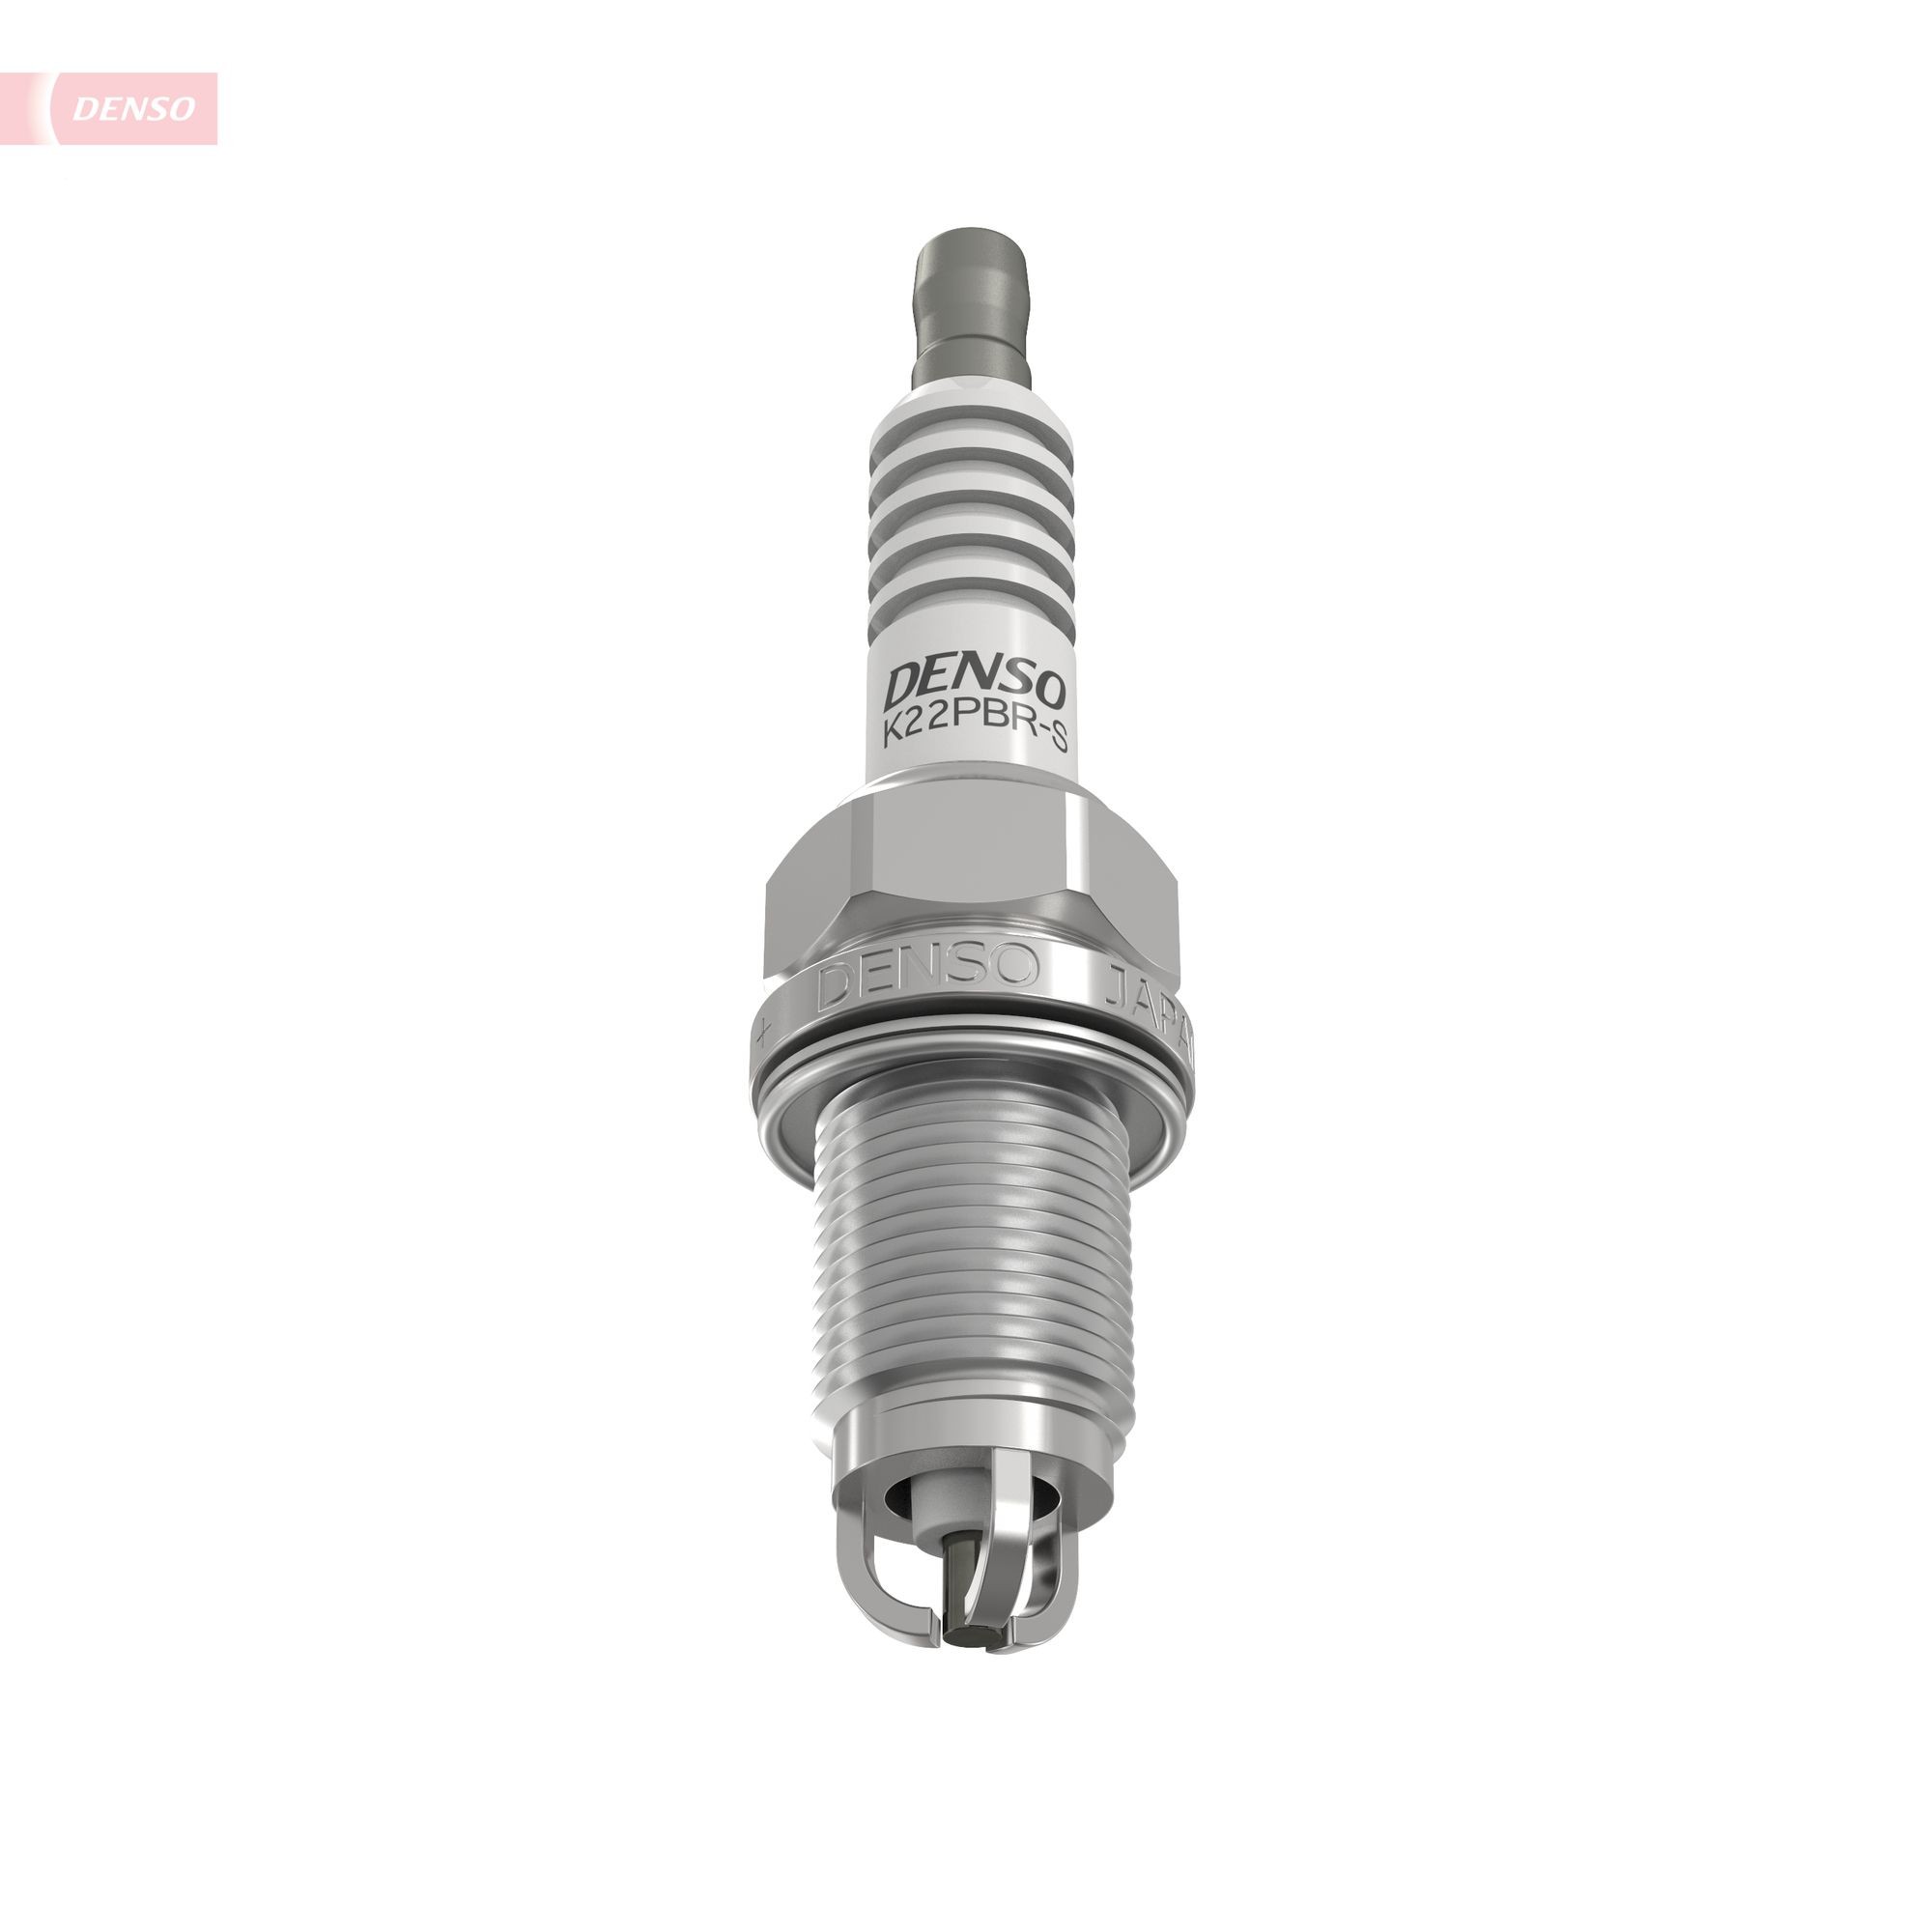 K22PBRS Spark plug DENSO D164 review and test